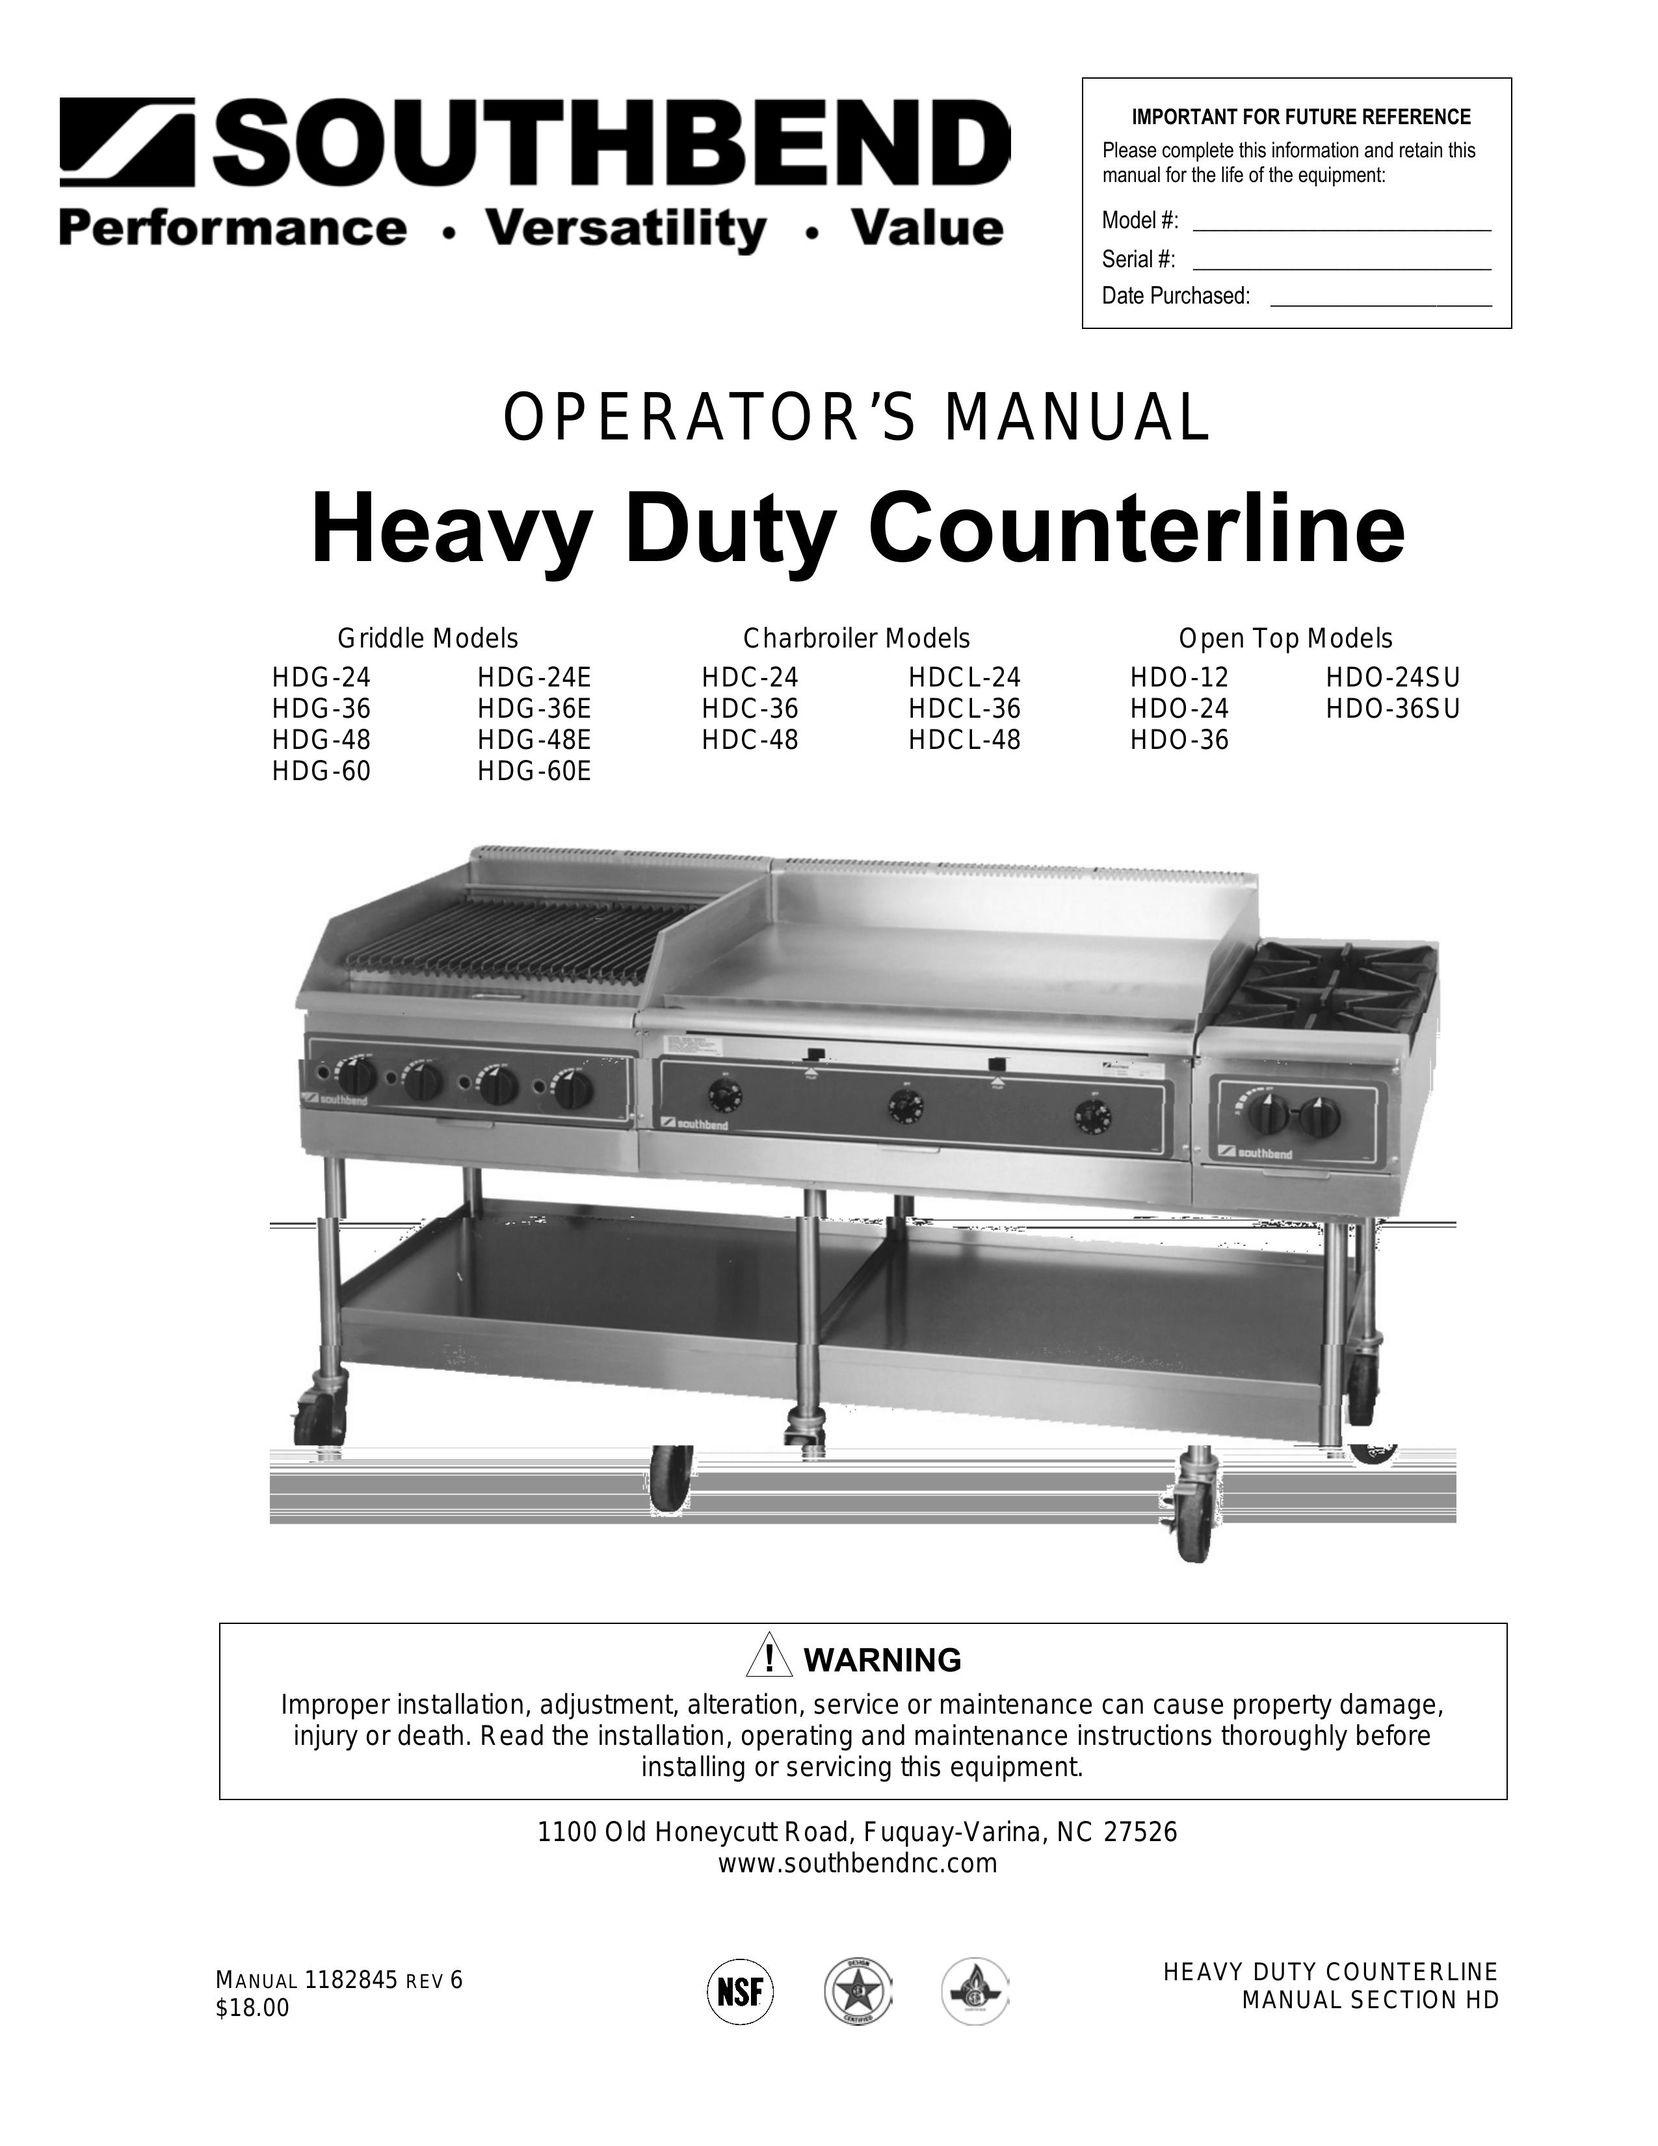 Southbend HDCL-24 Cooktop User Manual